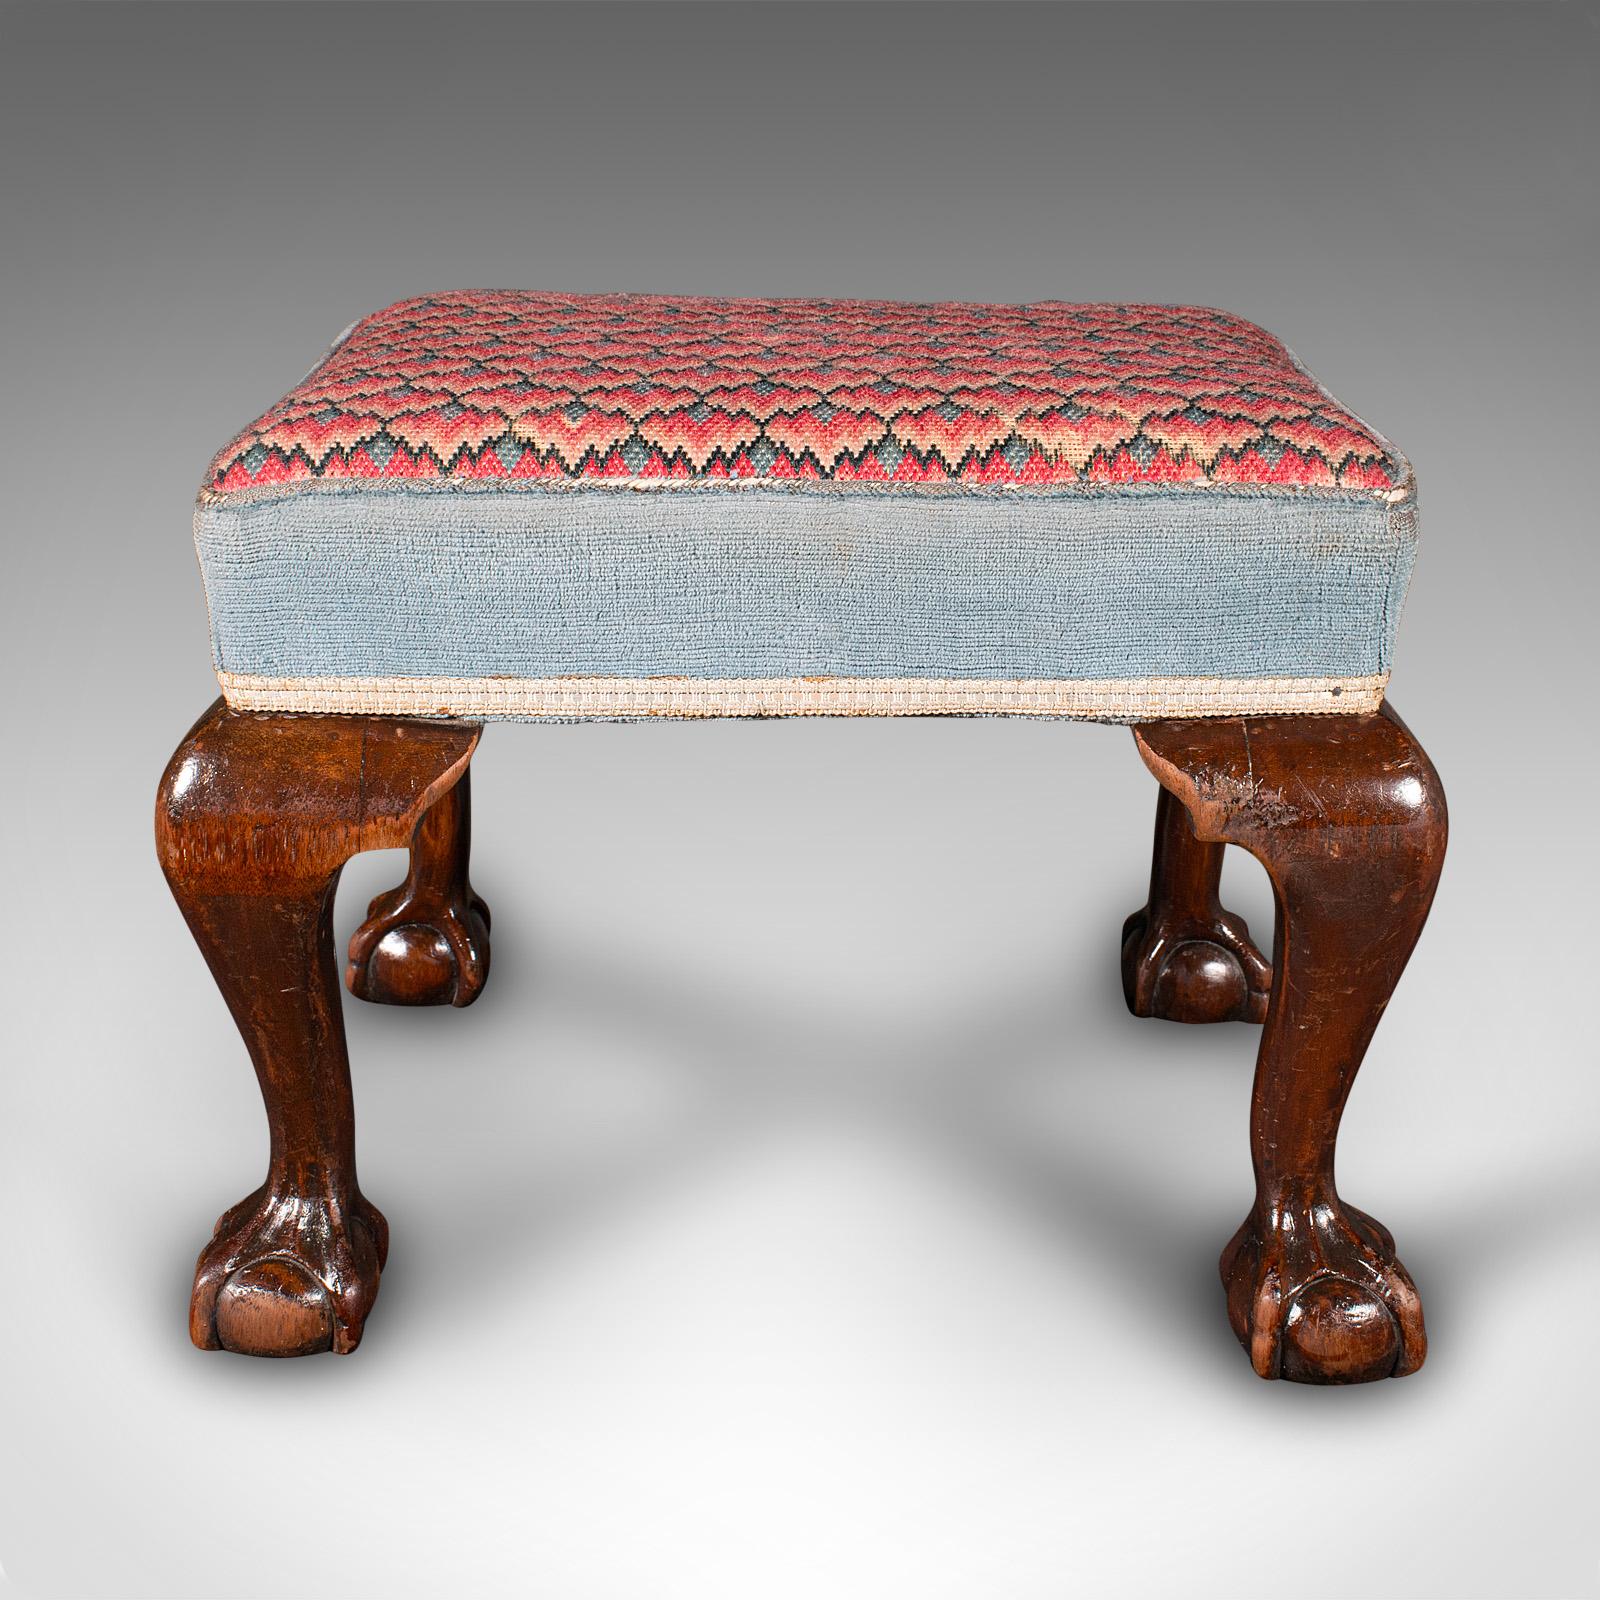 This is an antique fireside stool. An English, mahogany and needlepoint footstool, dating to the early Victorian period, circa 1850.

Cheerful needlepoint cushion over a prominent base
Displays a desirable aged patina and in good order
Select stocks